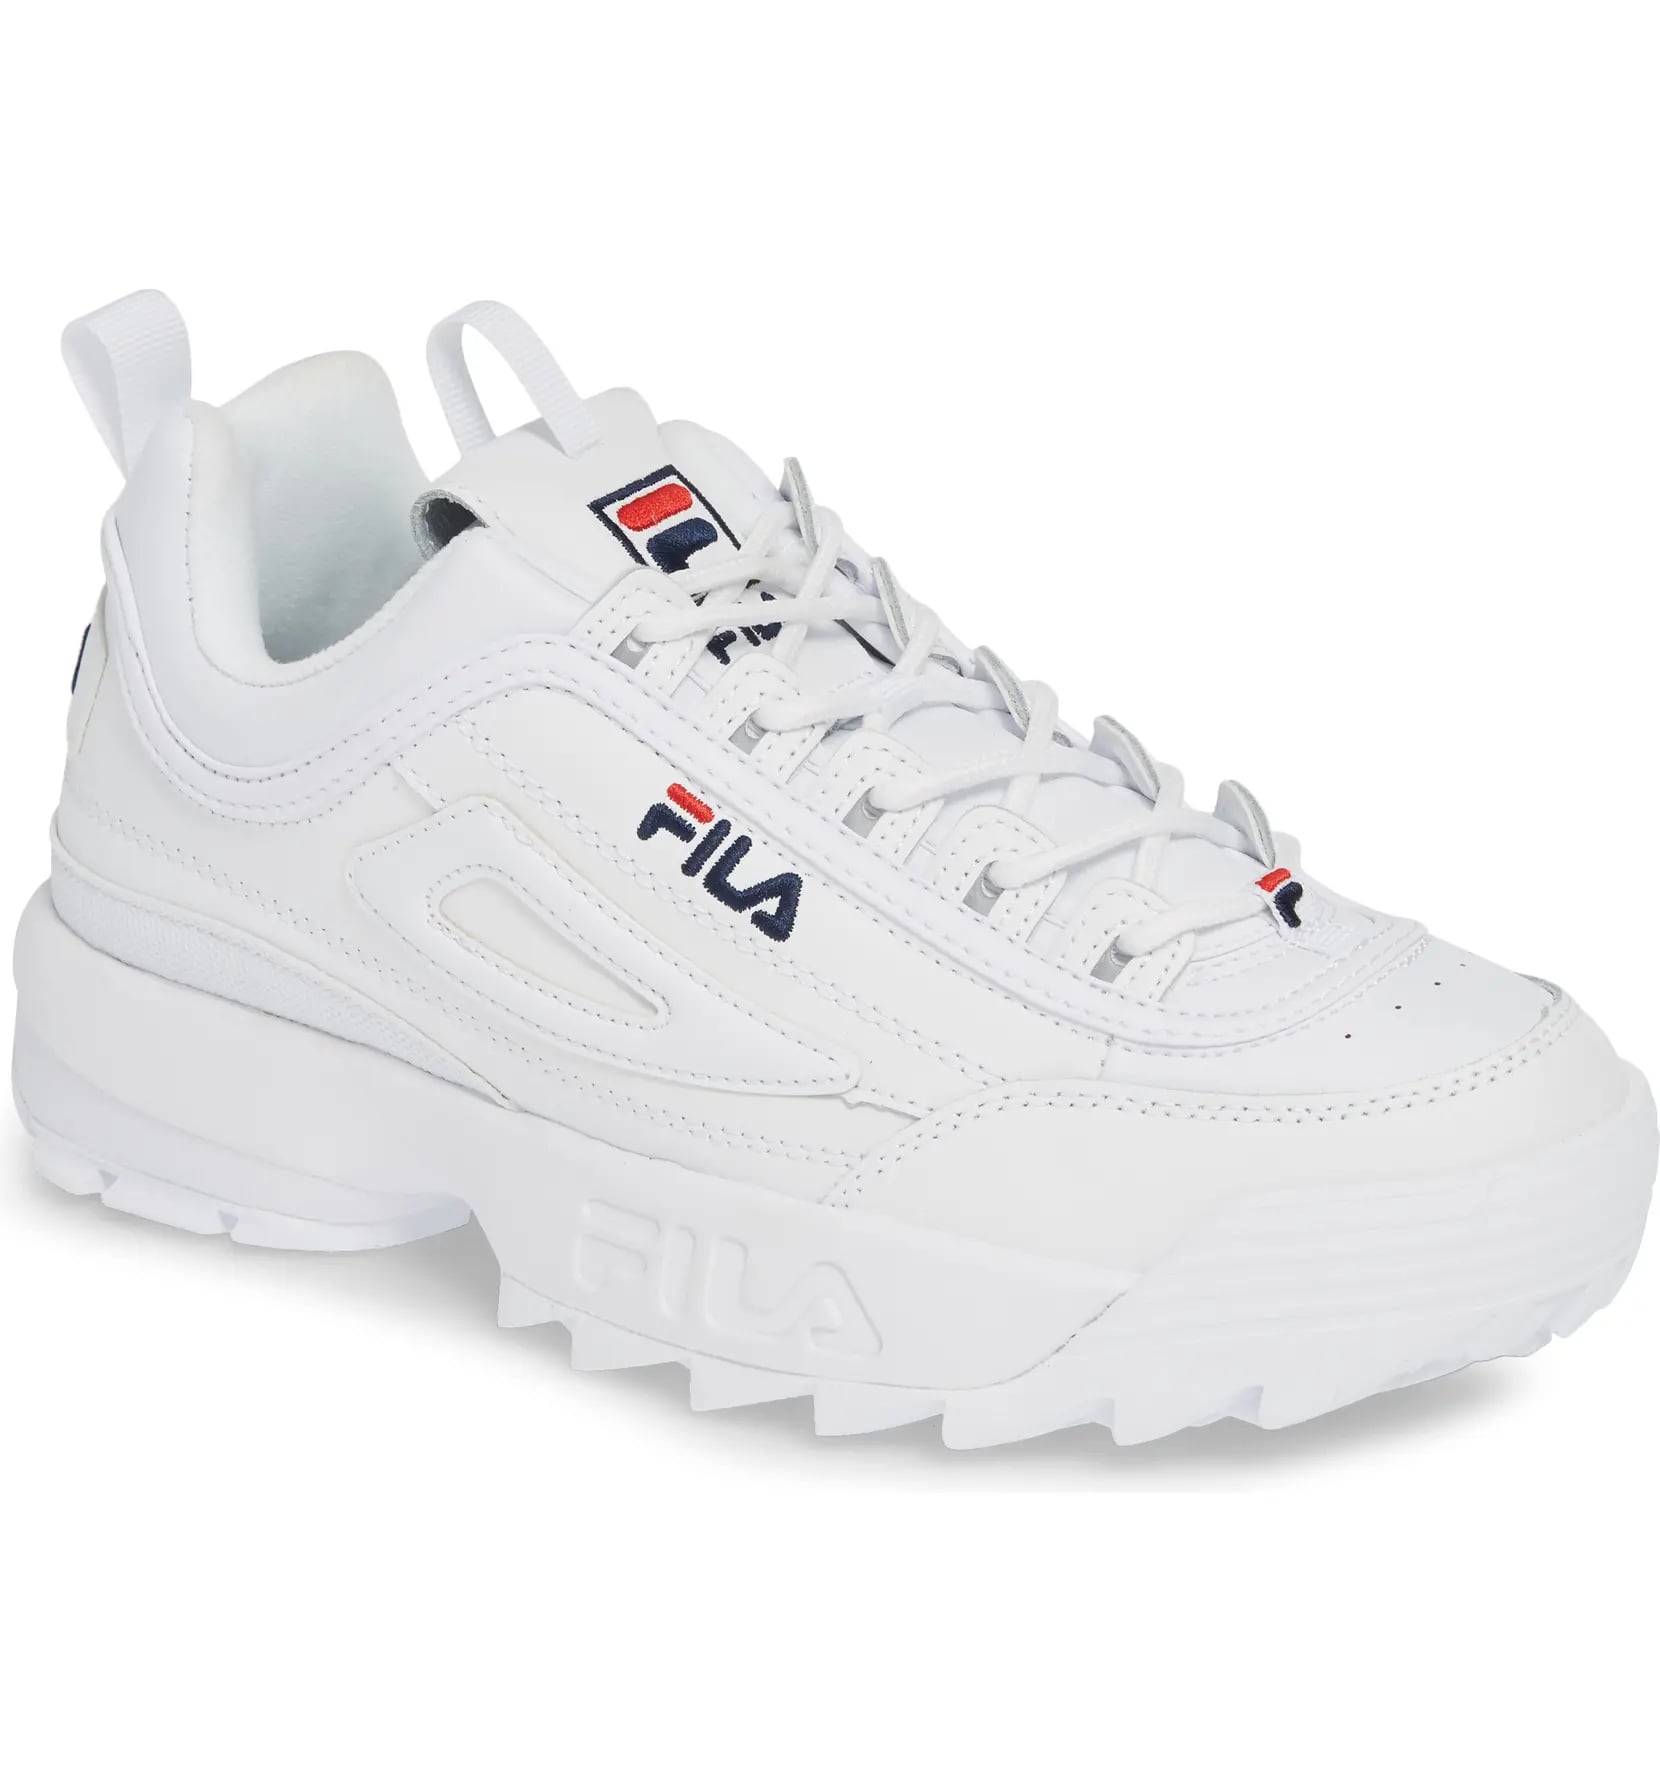 Fila Disruptor II Premium Sneaker | 17 Pairs of Comfortable Shoes That Have  Become Fashion-Influencer Staples | POPSUGAR Fashion Photo 27